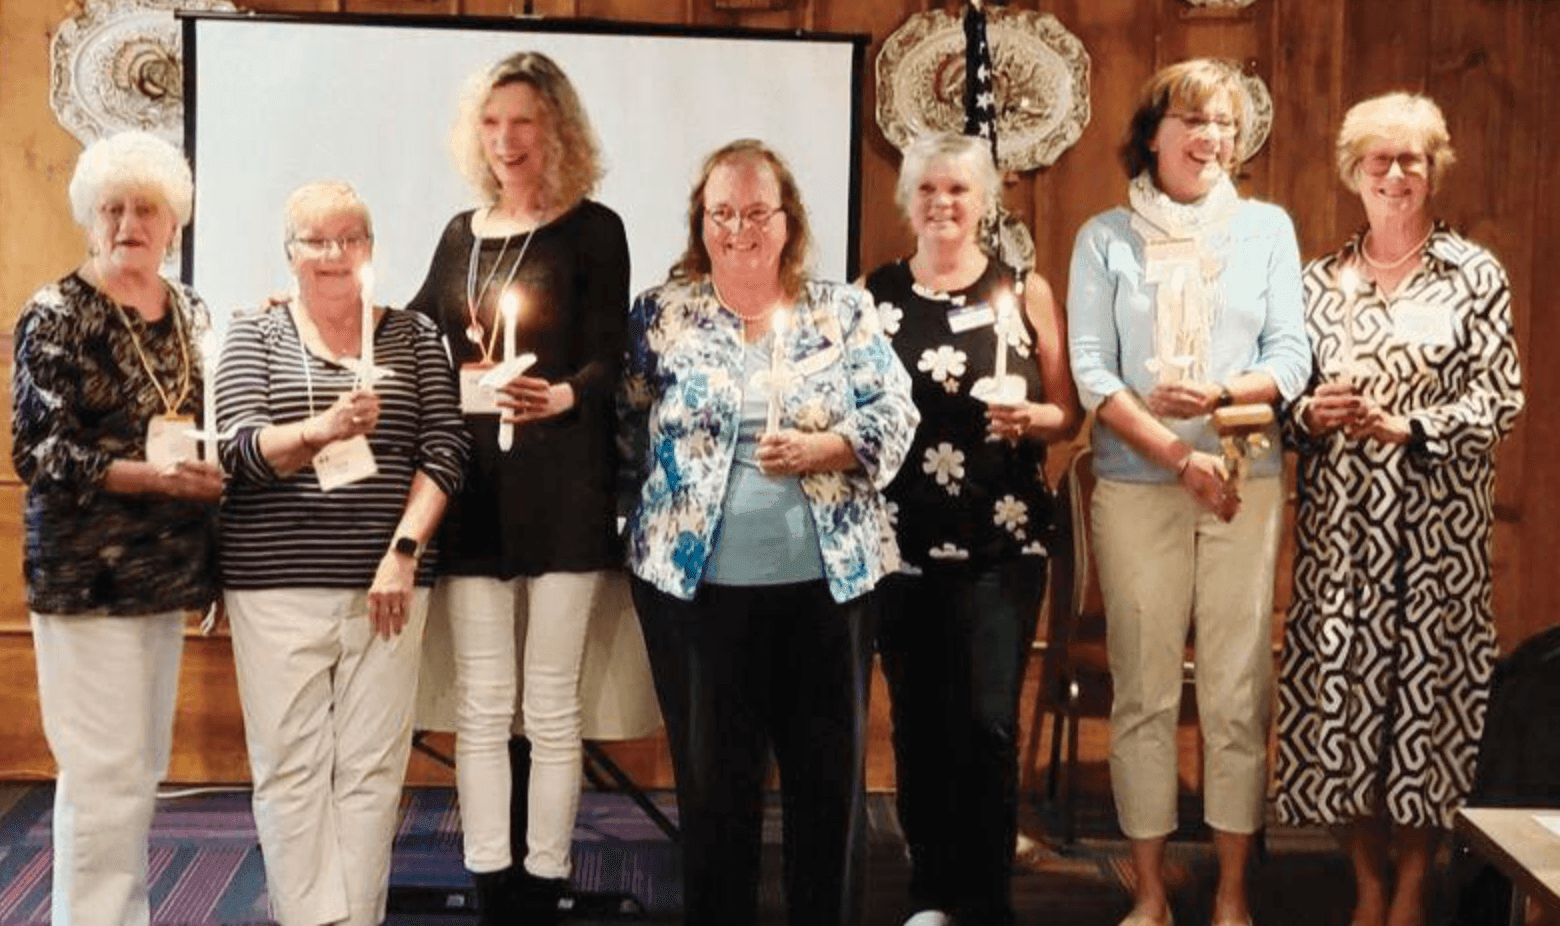 6/22/23 Laconia Daily Sun - Club's Hart-y feast for the MWC